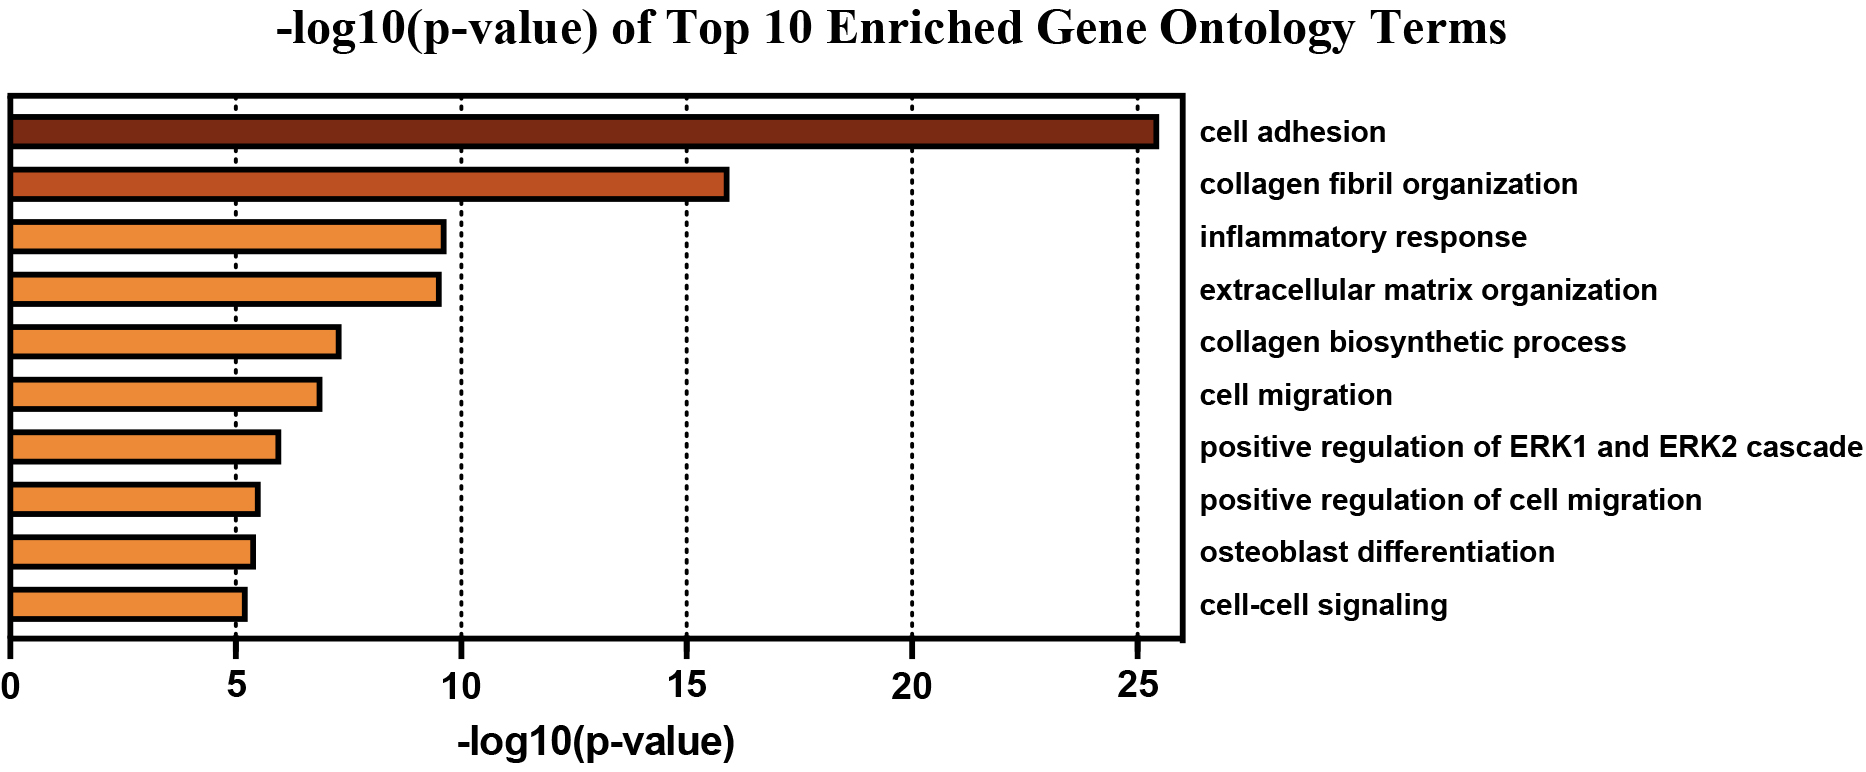 Top 10 enriched GO Terms Biological Process used to filter genes into relevant biological processes pertaining to EAC.